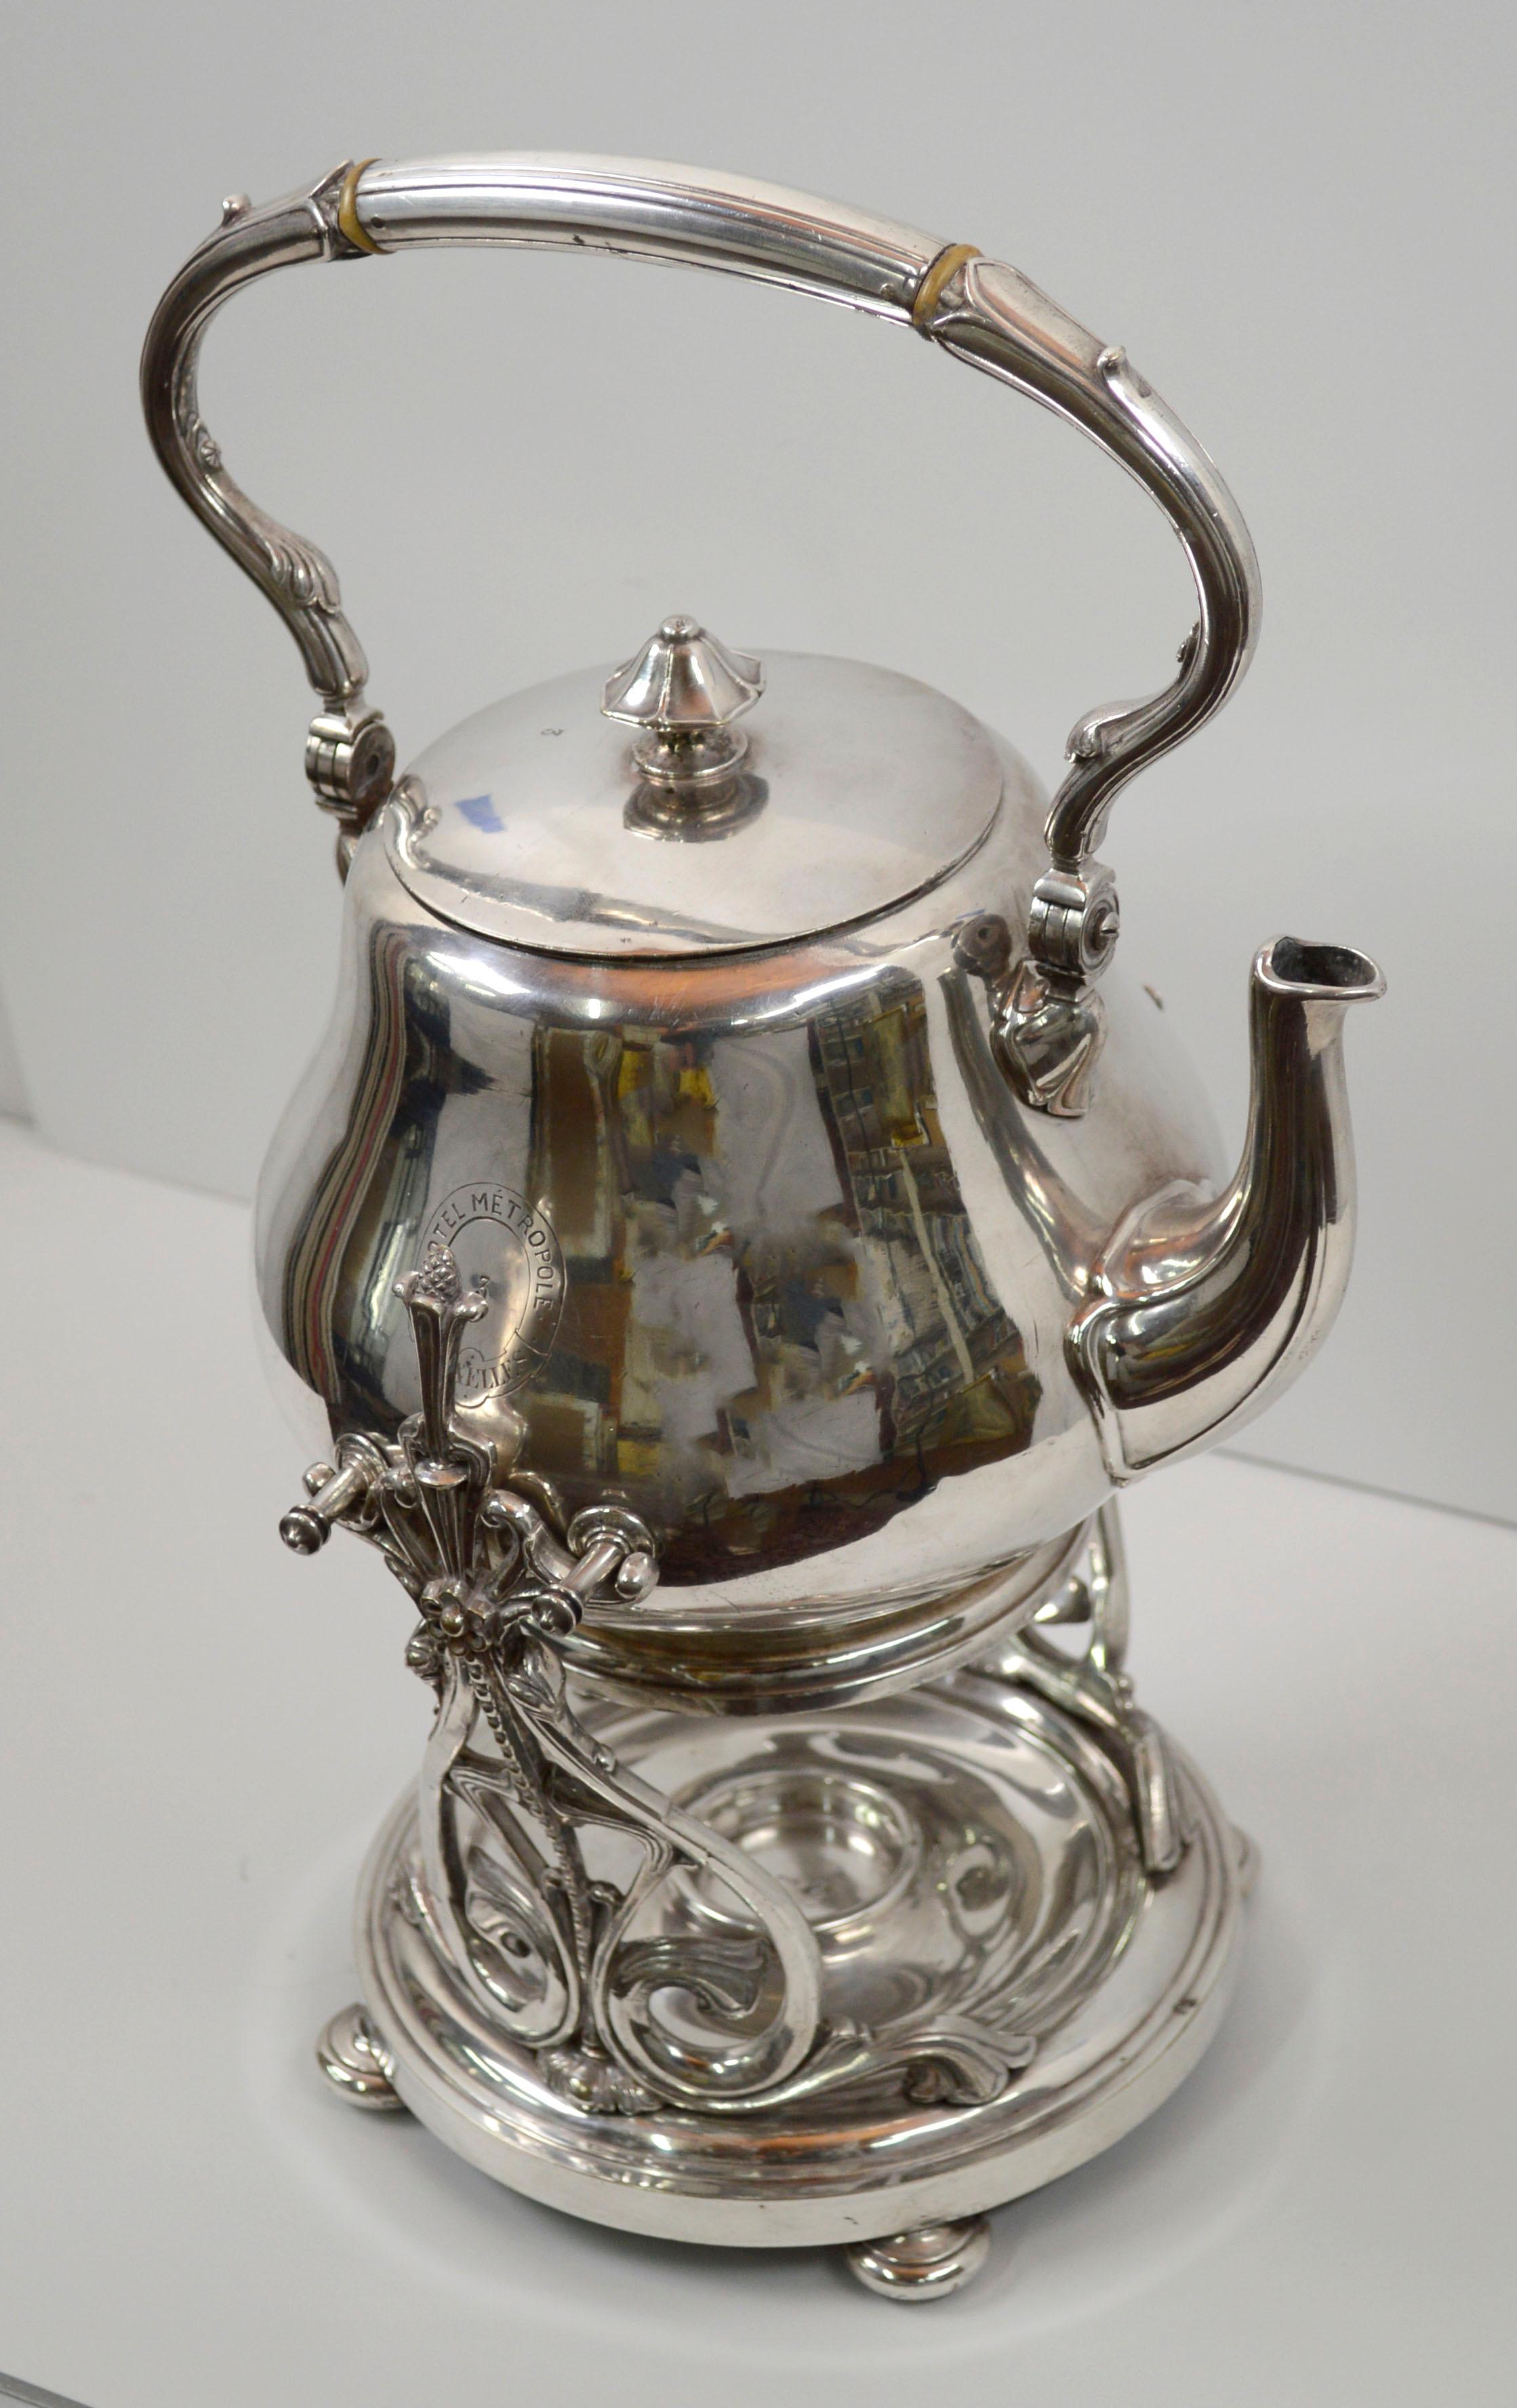 Early 20th century Hotel Metropole Brussels silver plated tilting teapot with stand, by Christofle (French, 1830-present), c.1900. Elegant floral themed filigree details decorate the handles and stand. Teapot is embossed with the logo for Hotel